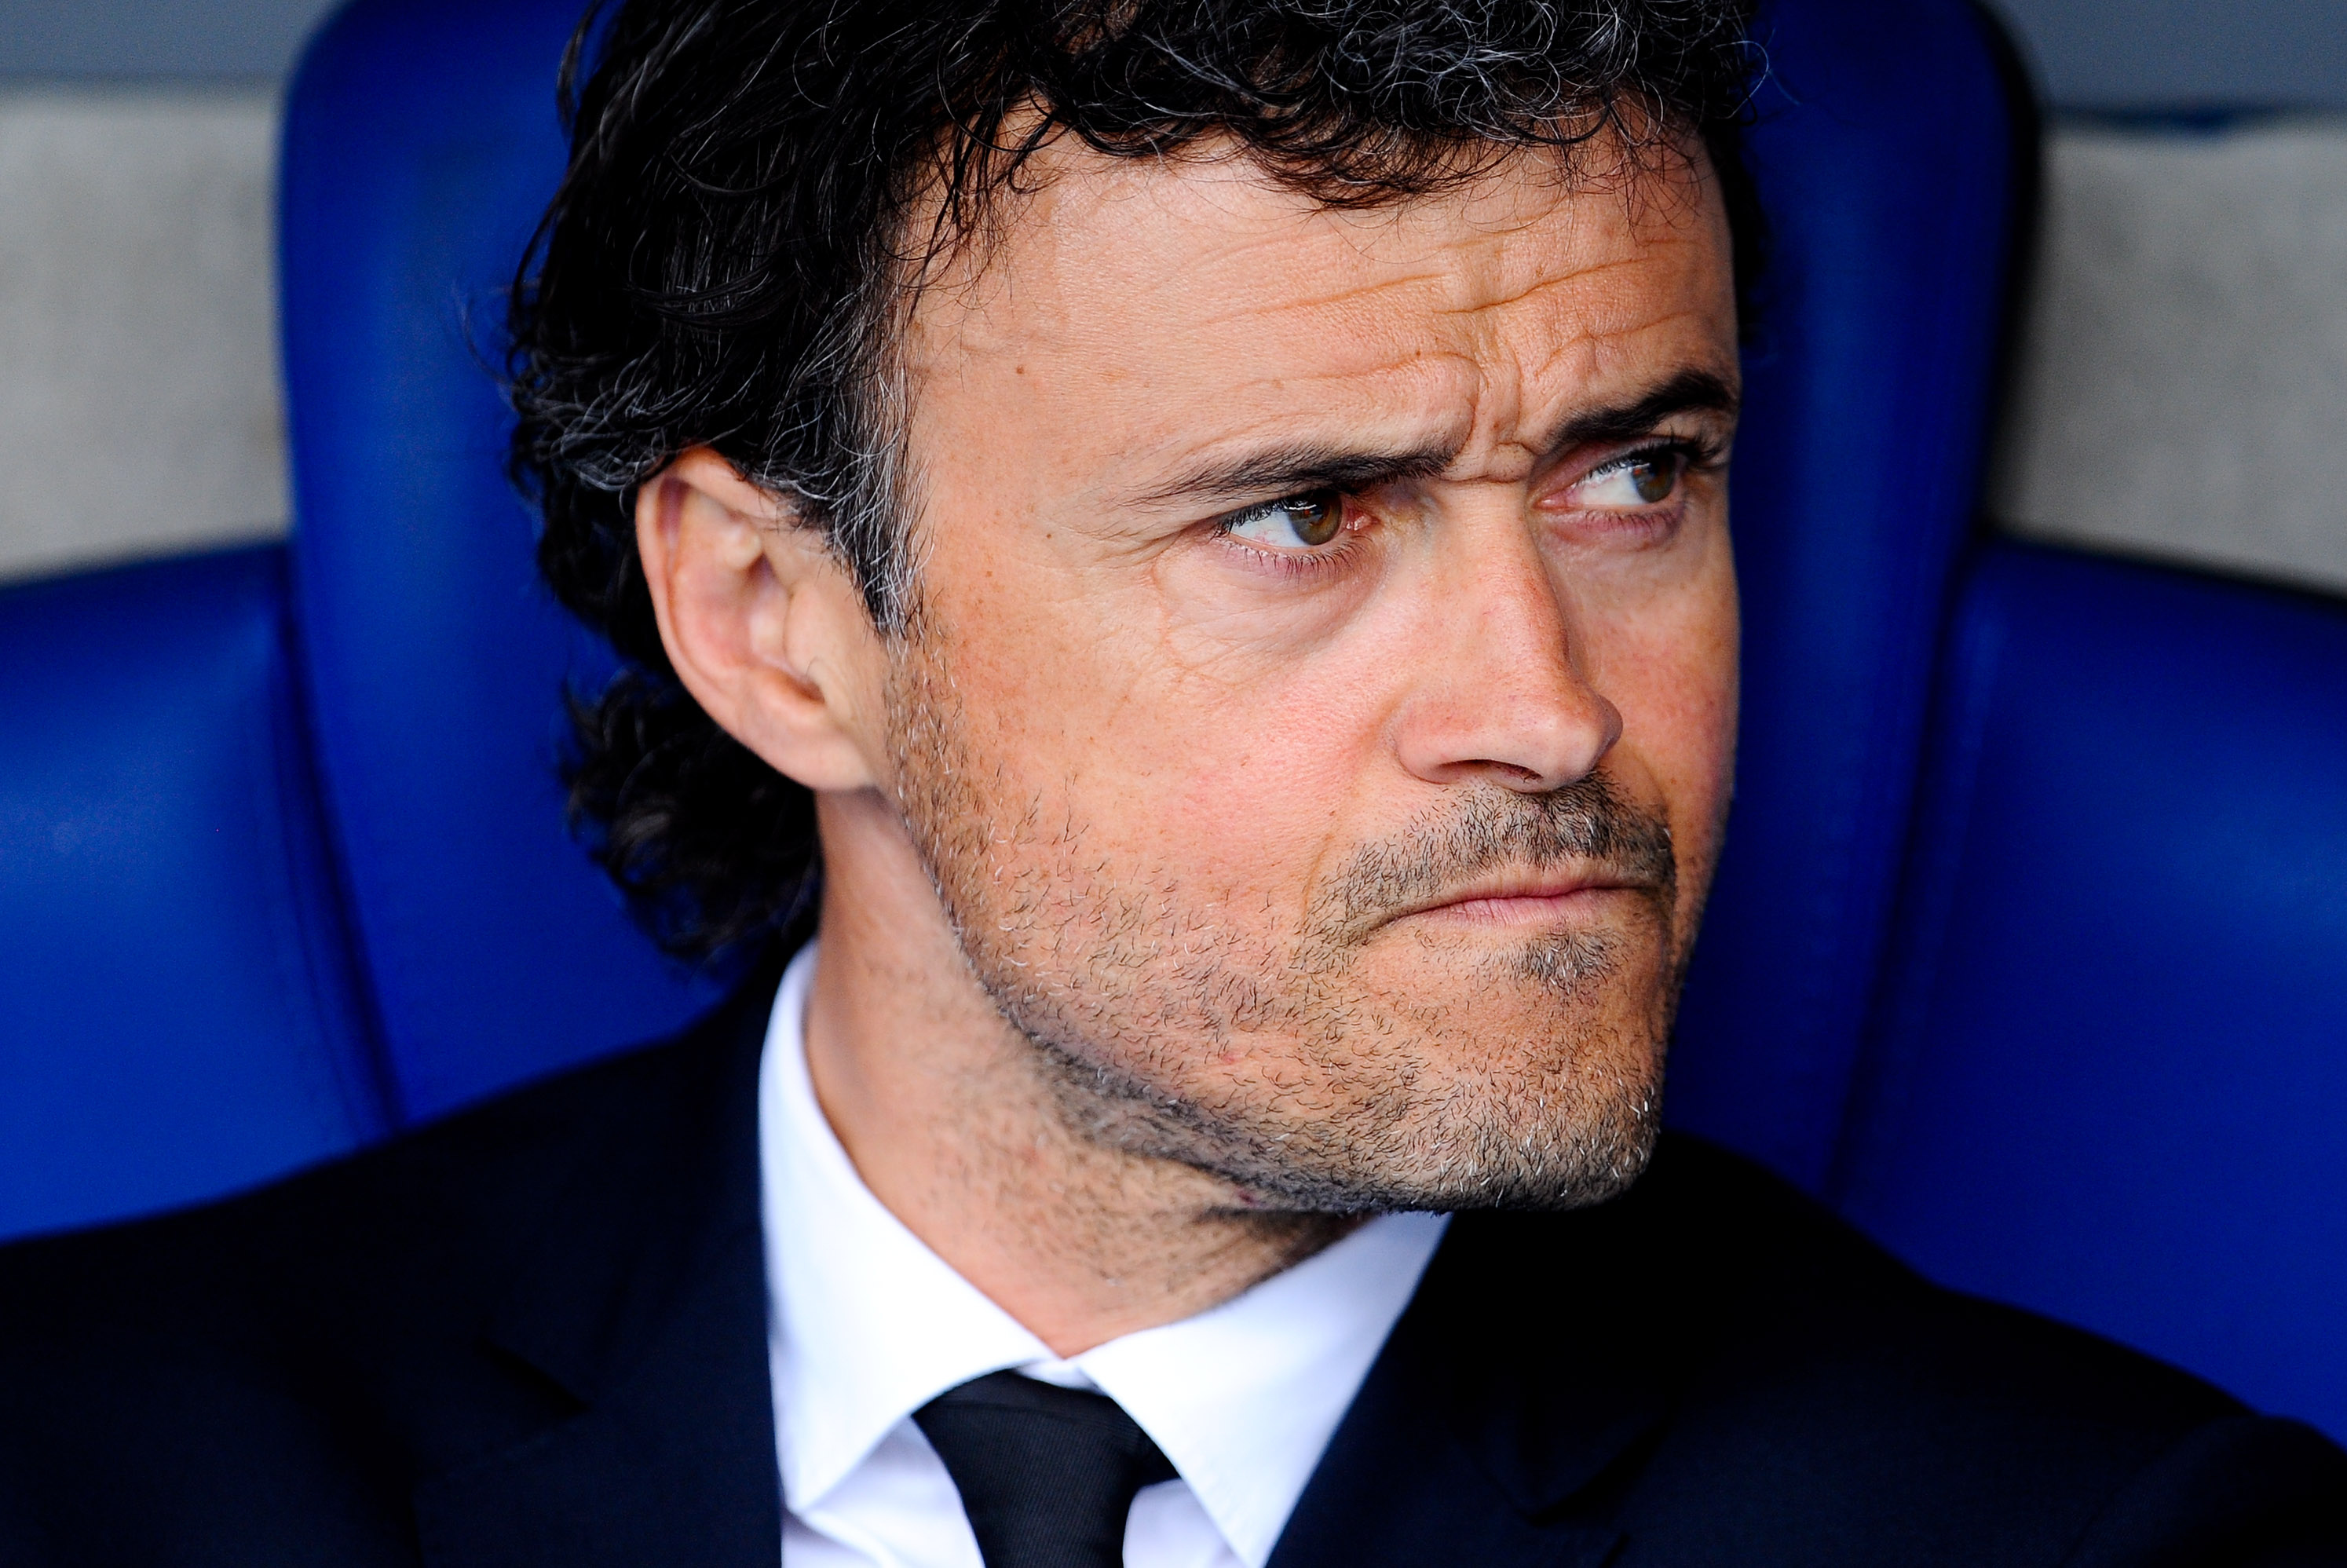 Pep Guardiola's Barcelona of 2010/11 v Luis Enrique's current side who  would win?, Football News